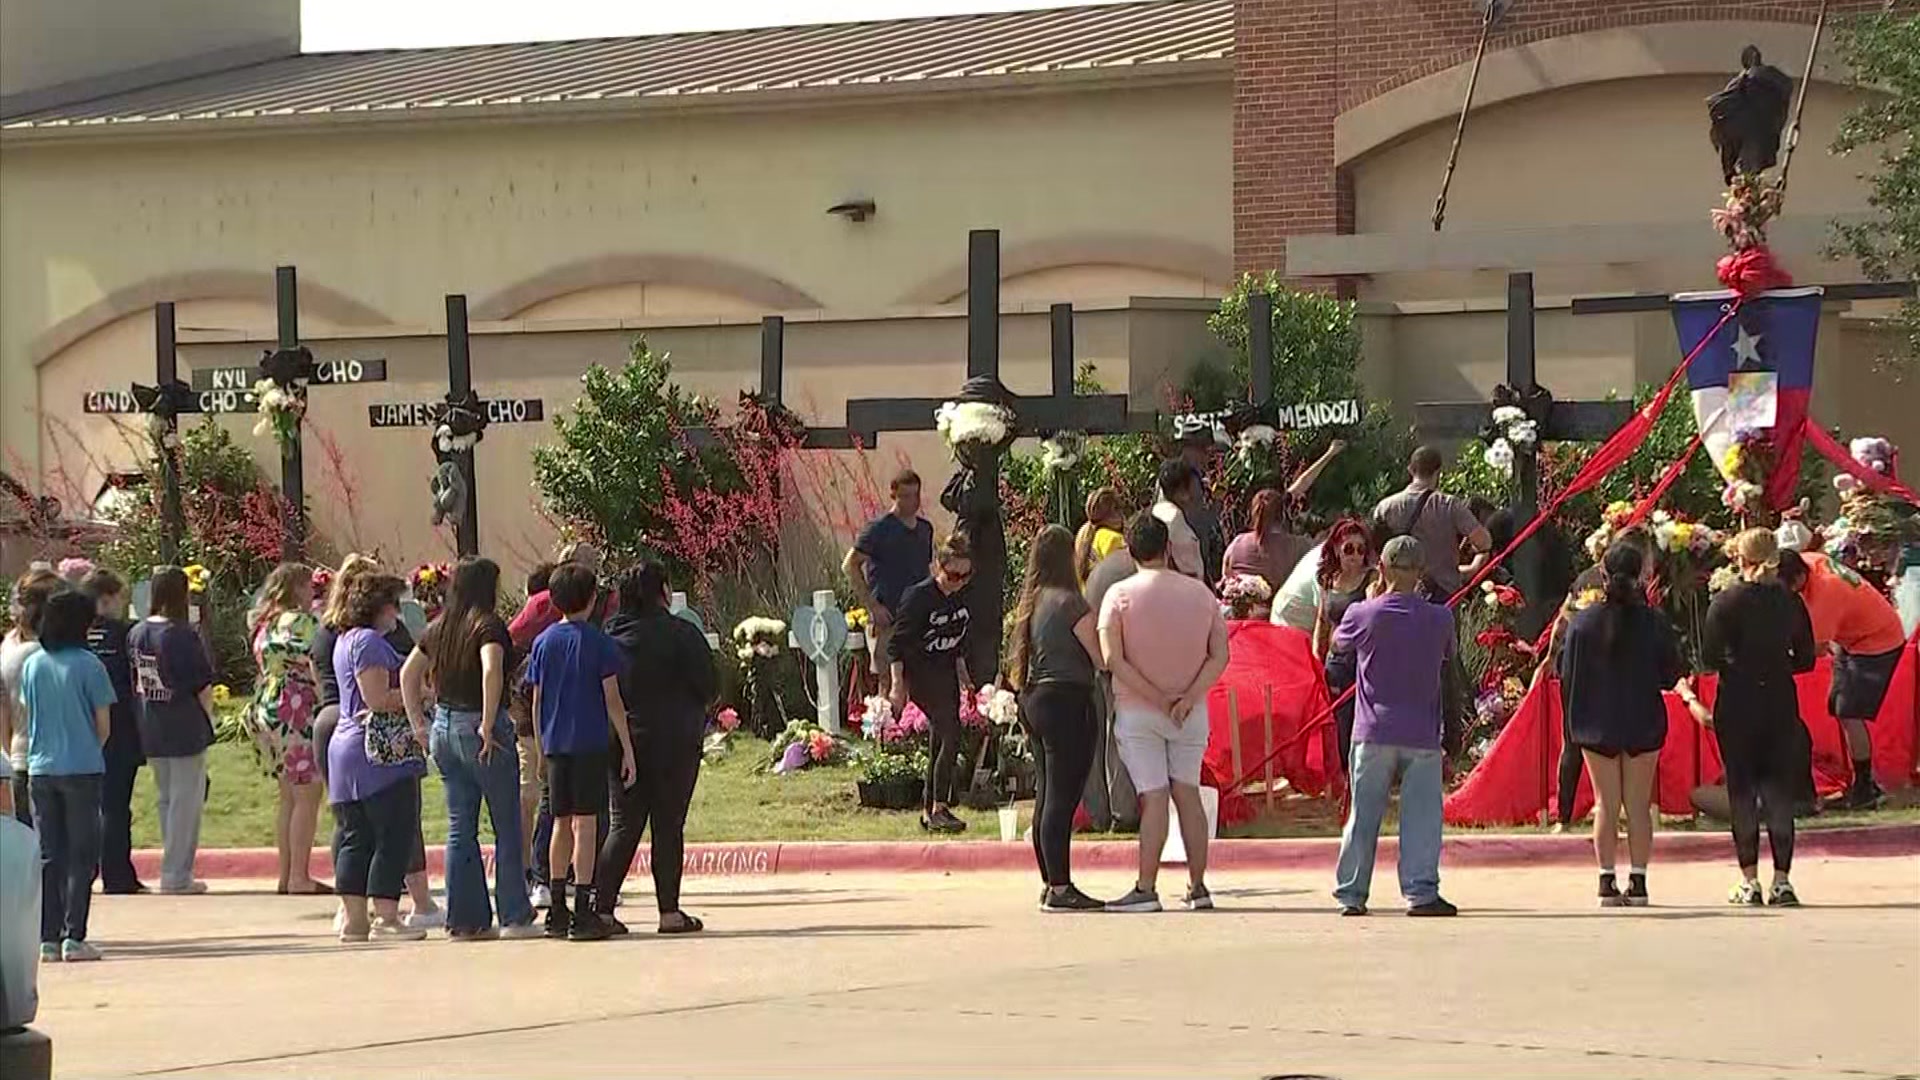 3 Children From 2 Families Among 8 Killed in Texas Mall Shooting